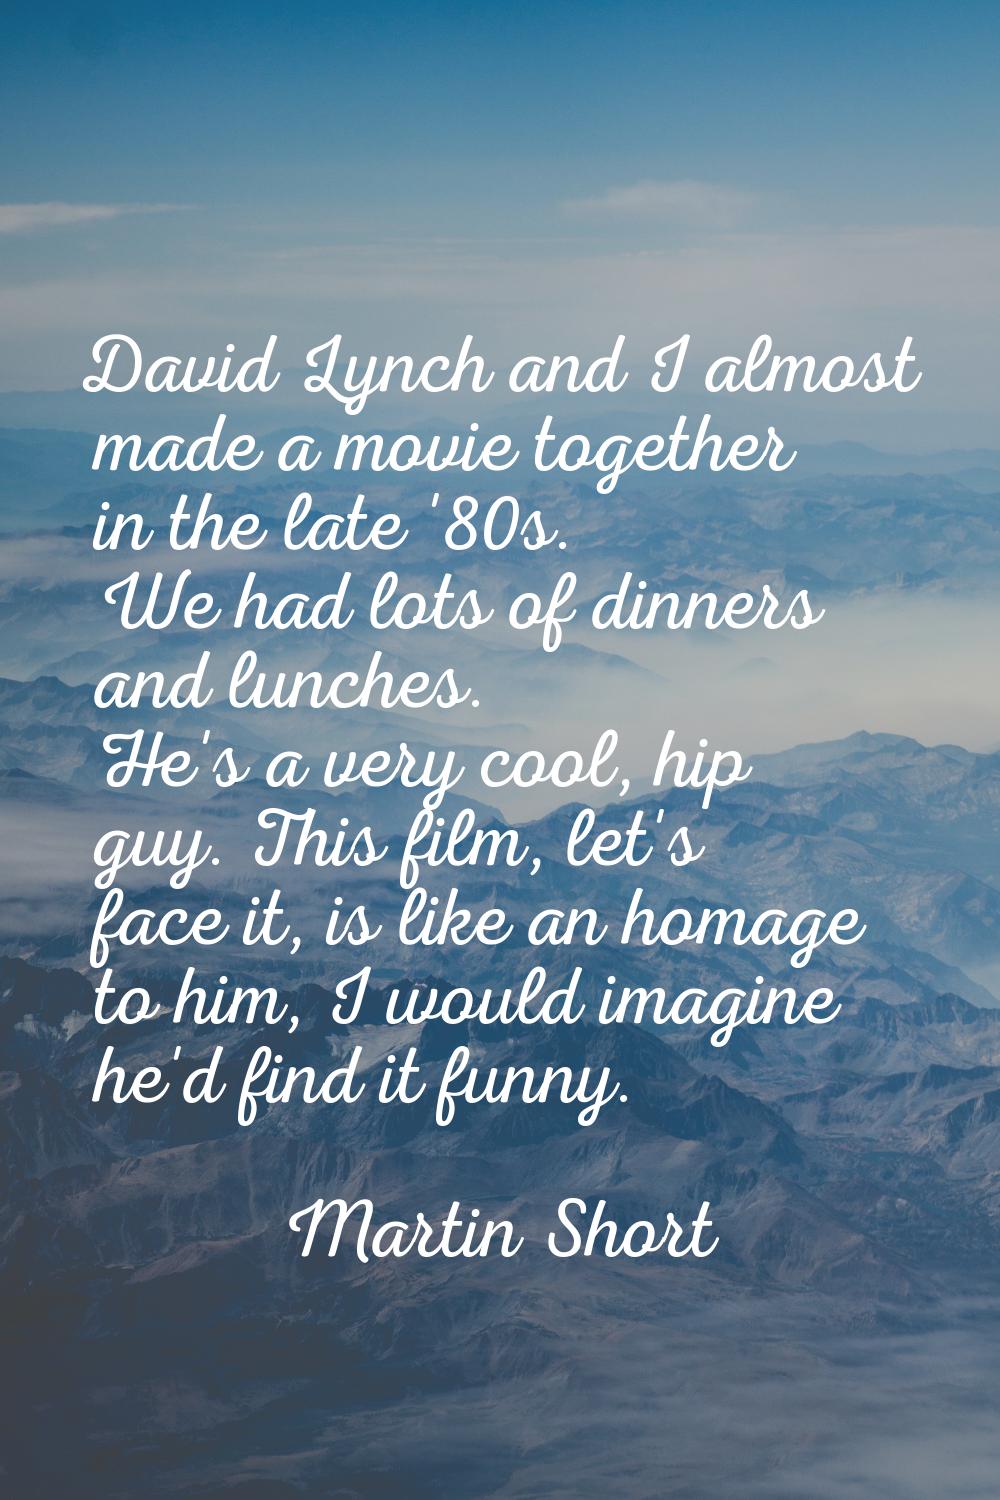 David Lynch and I almost made a movie together in the late '80s. We had lots of dinners and lunches